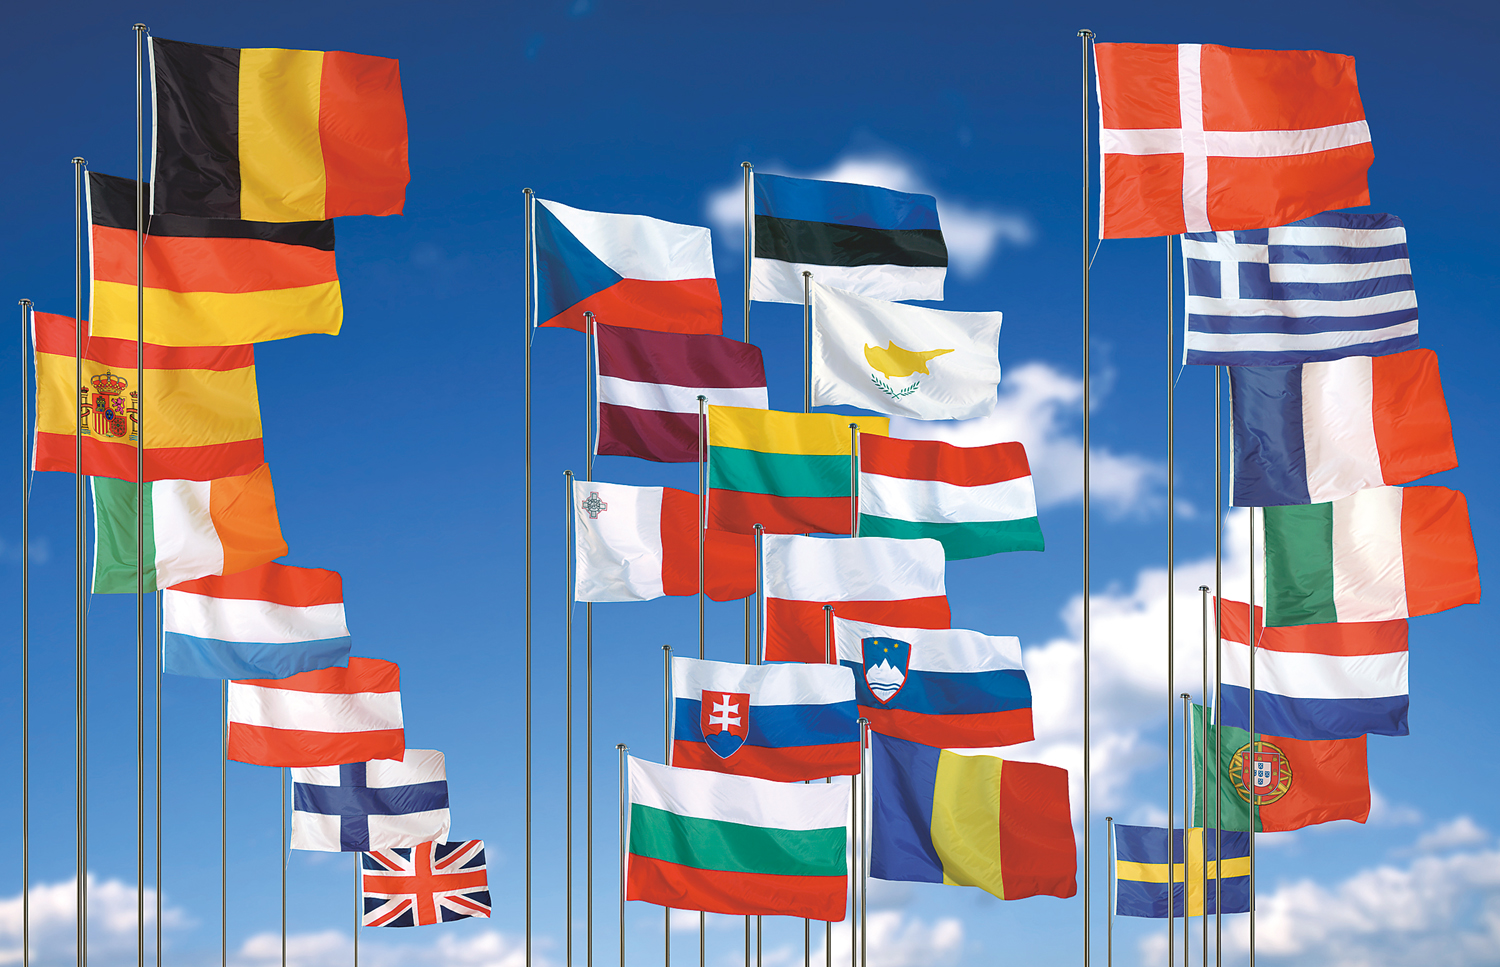 The National European flags in 2007